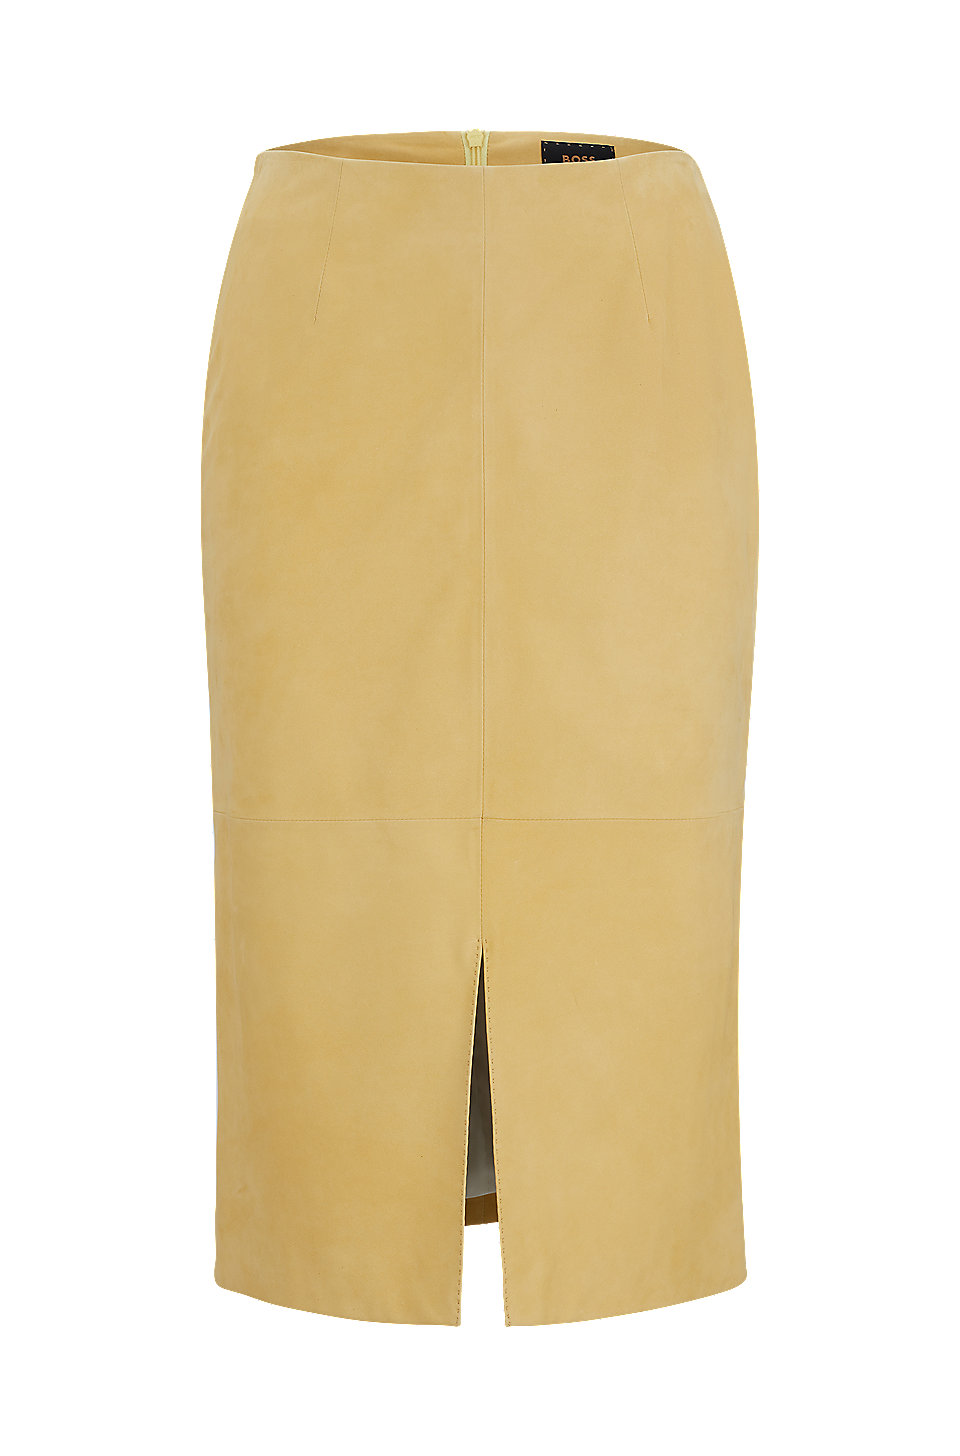 BOSS - Pencil skirt in nubuck leather with front slit